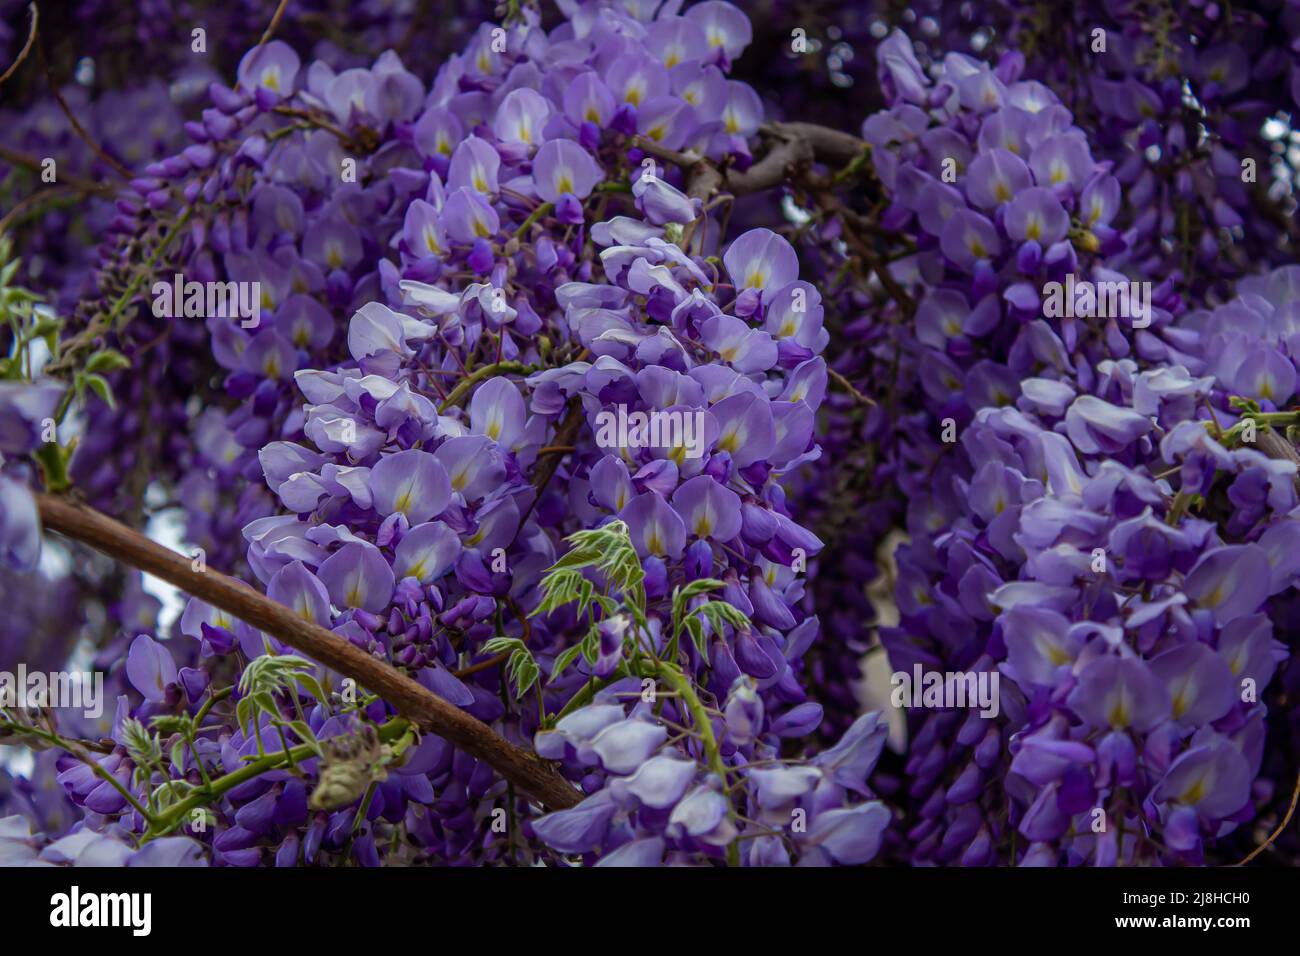 Wisteria sinensis. Closeup photo of Japanese Wisteria flowers. Blossom background. Purple flowers in the garden. Stock Photo